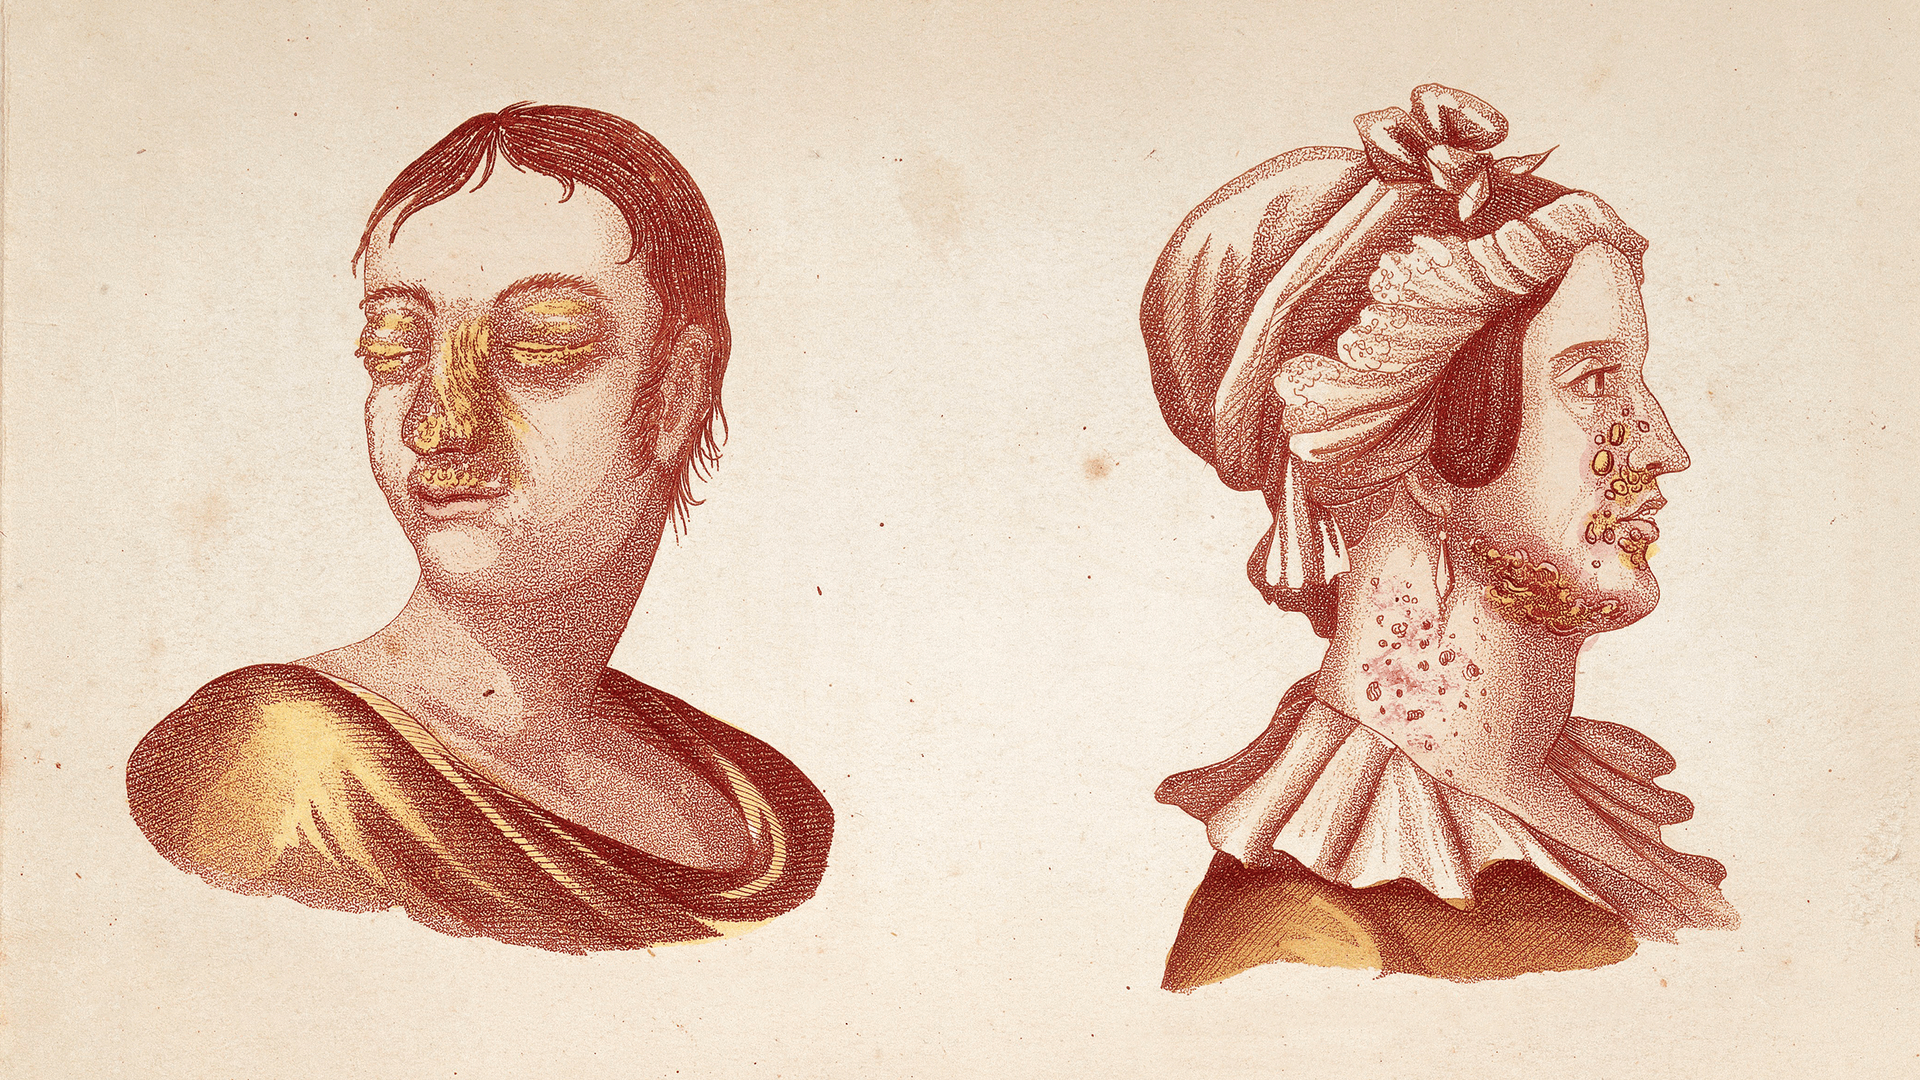 Two red and orange illustrations of figures with skin damage